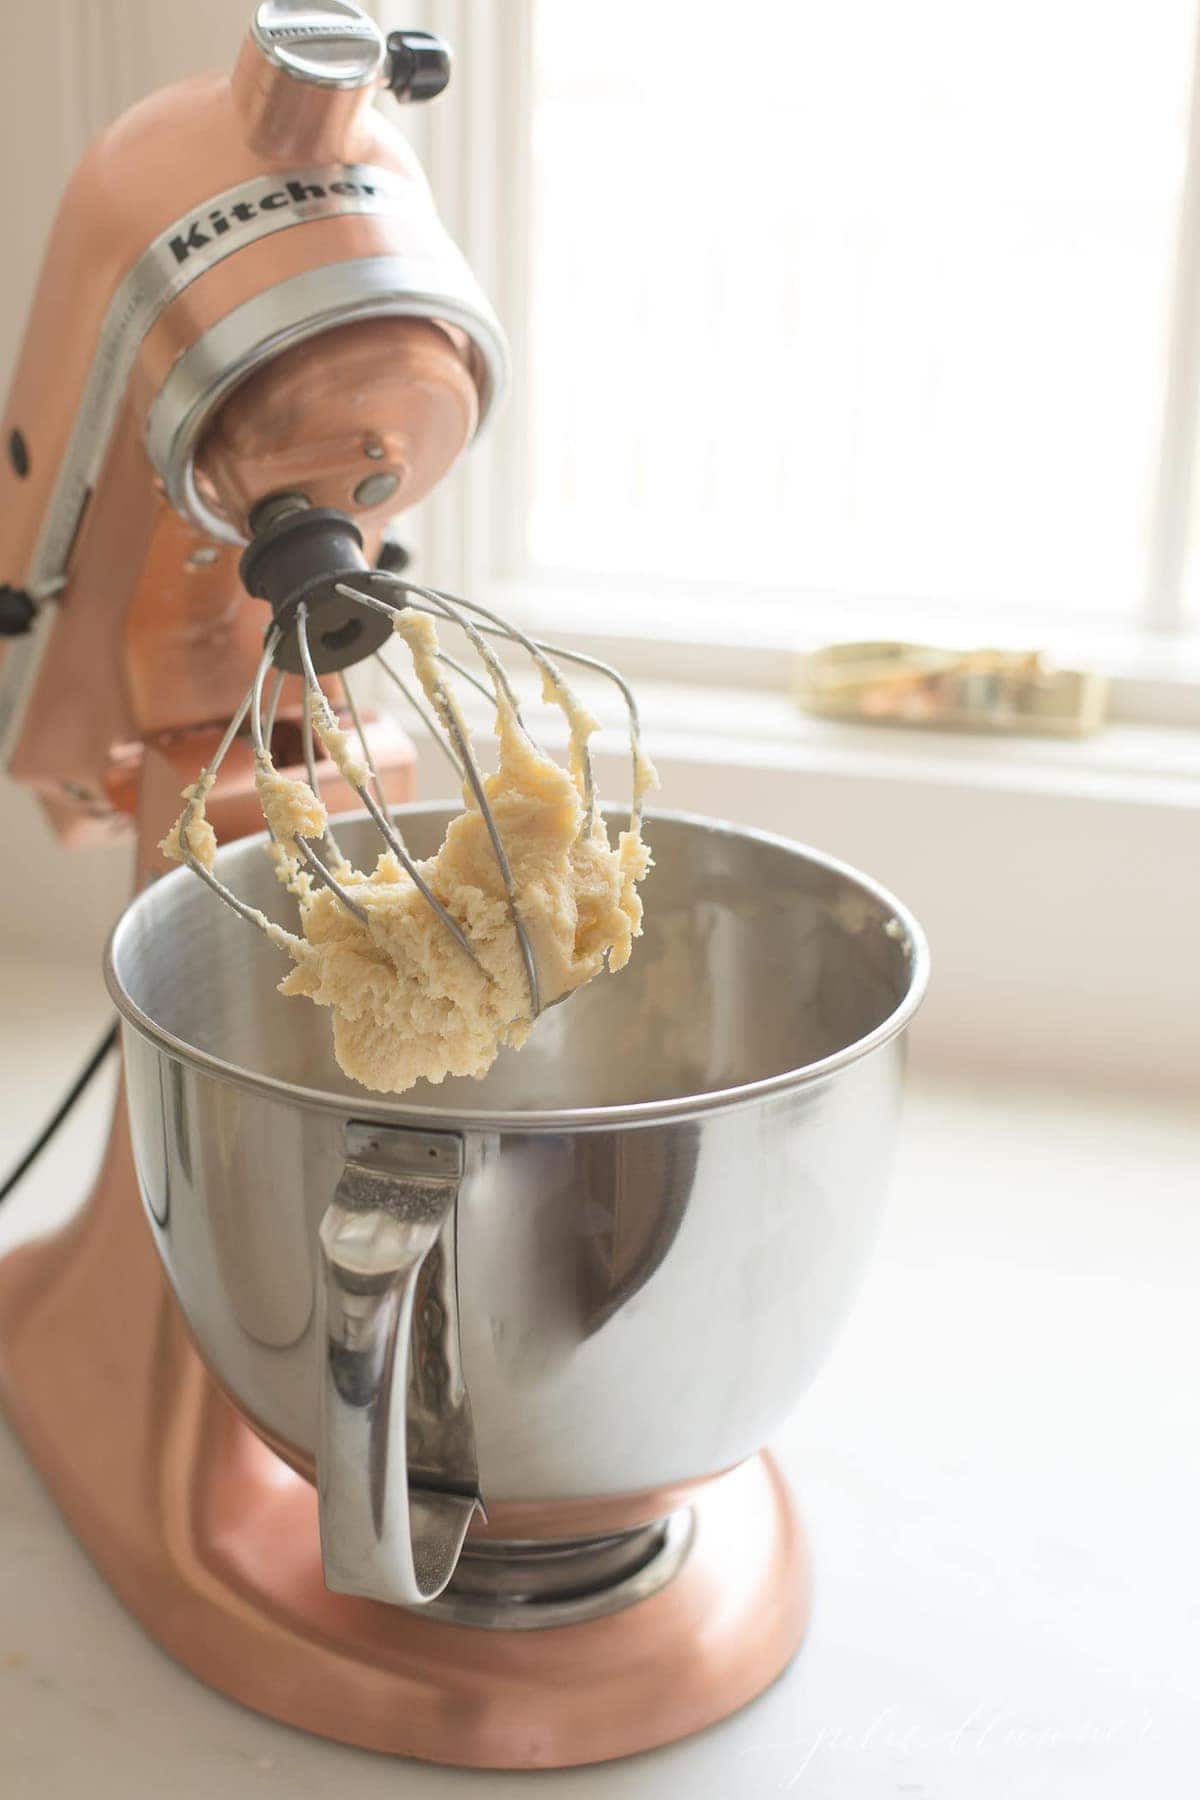 Mixing the dough in a stand mixer